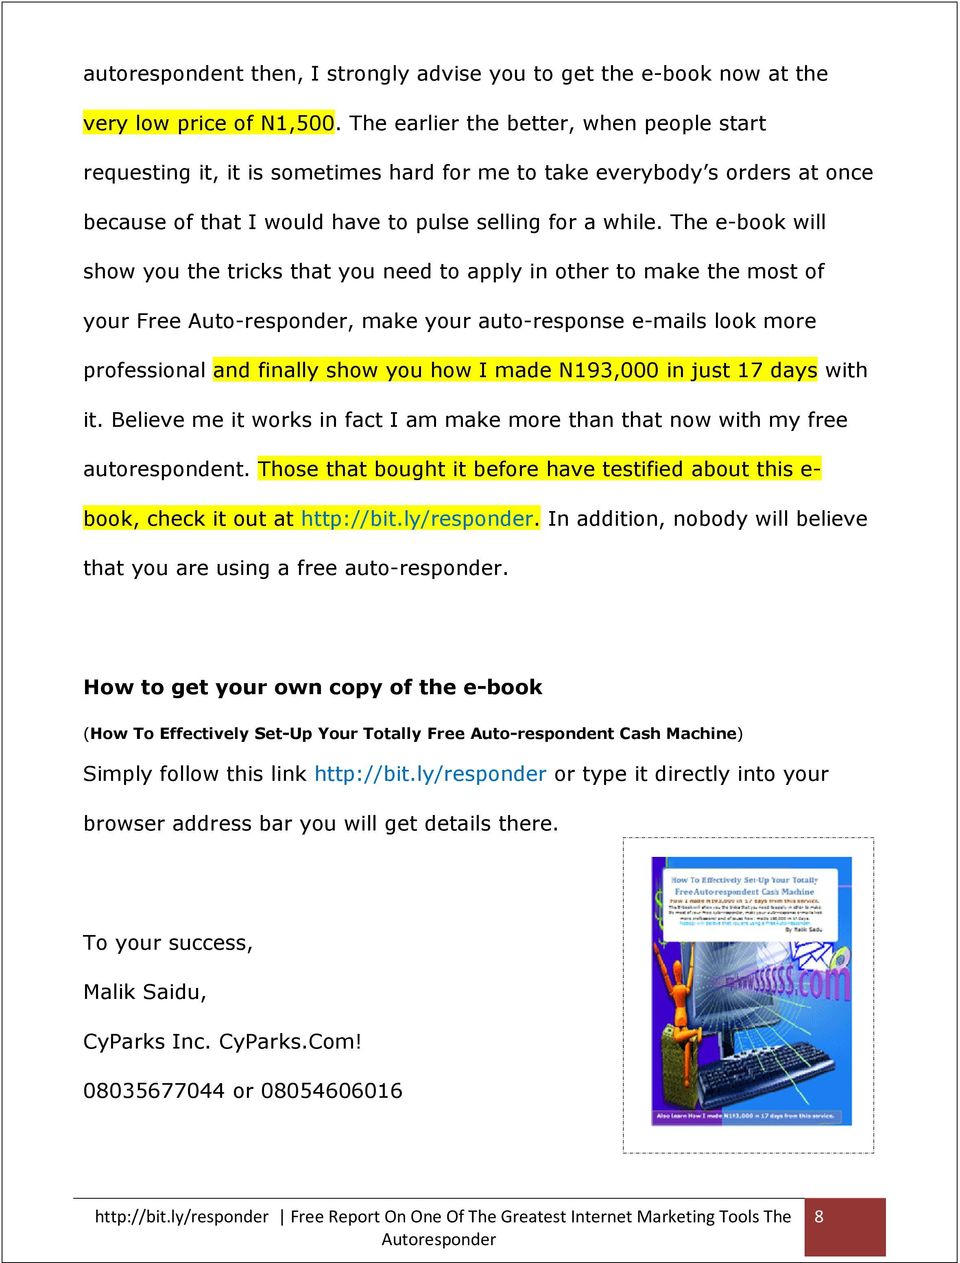 The e-book will show you the tricks that you need to apply in other to make the most of your Free Auto-responder, make your auto-response e-mails look more professional and finally show you how I